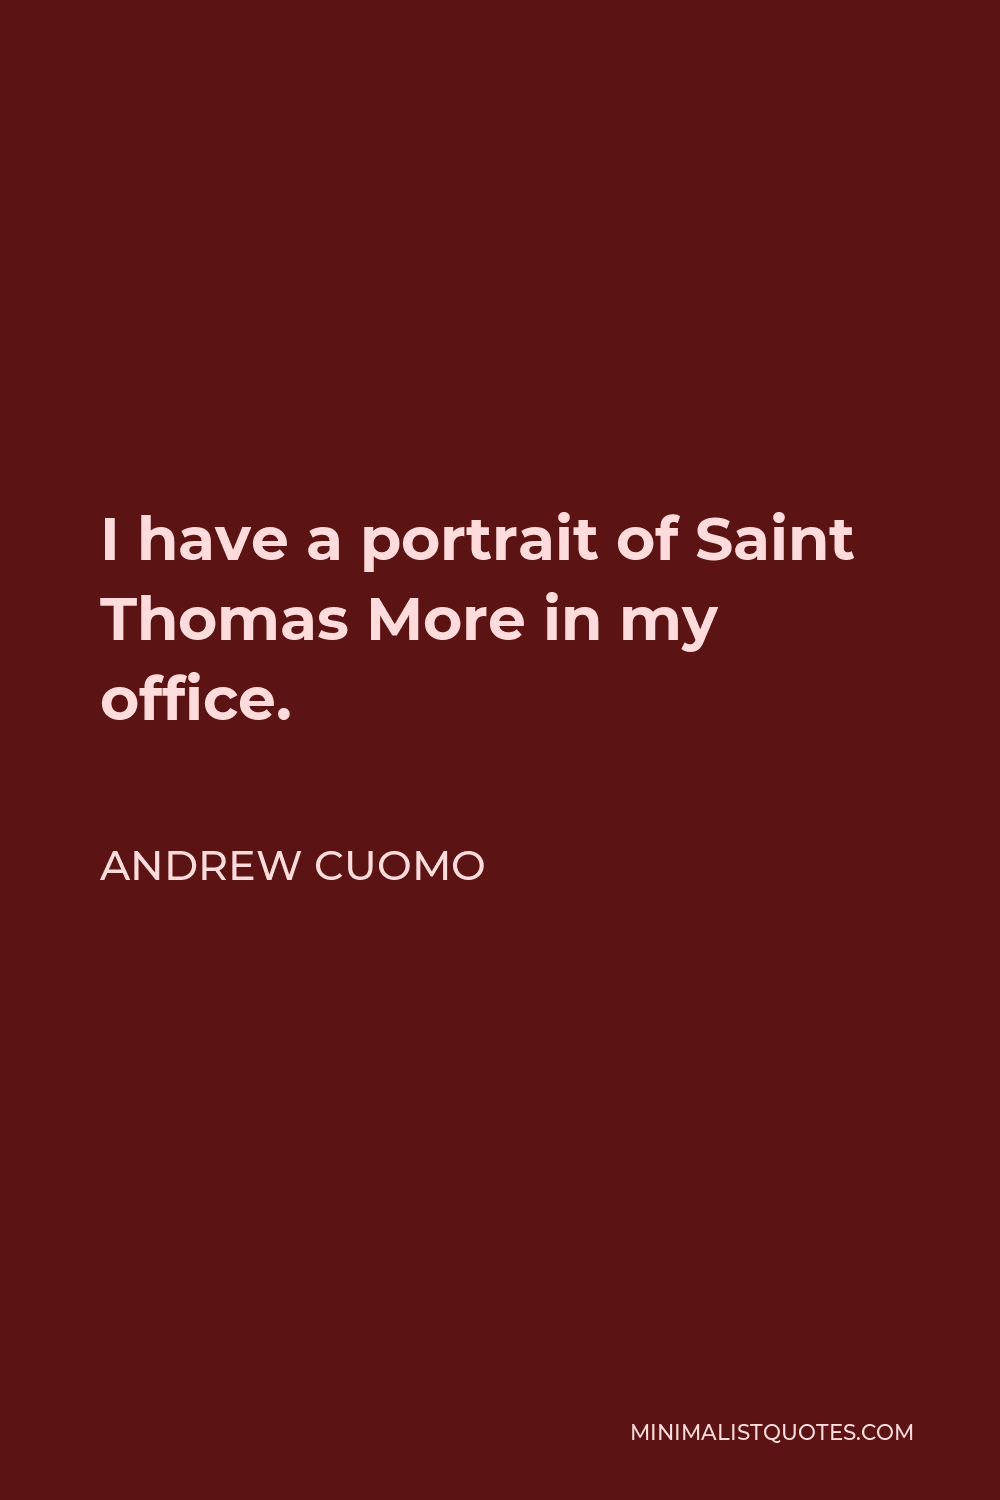 Andrew Cuomo Quote - I have a portrait of Saint Thomas More in my office.